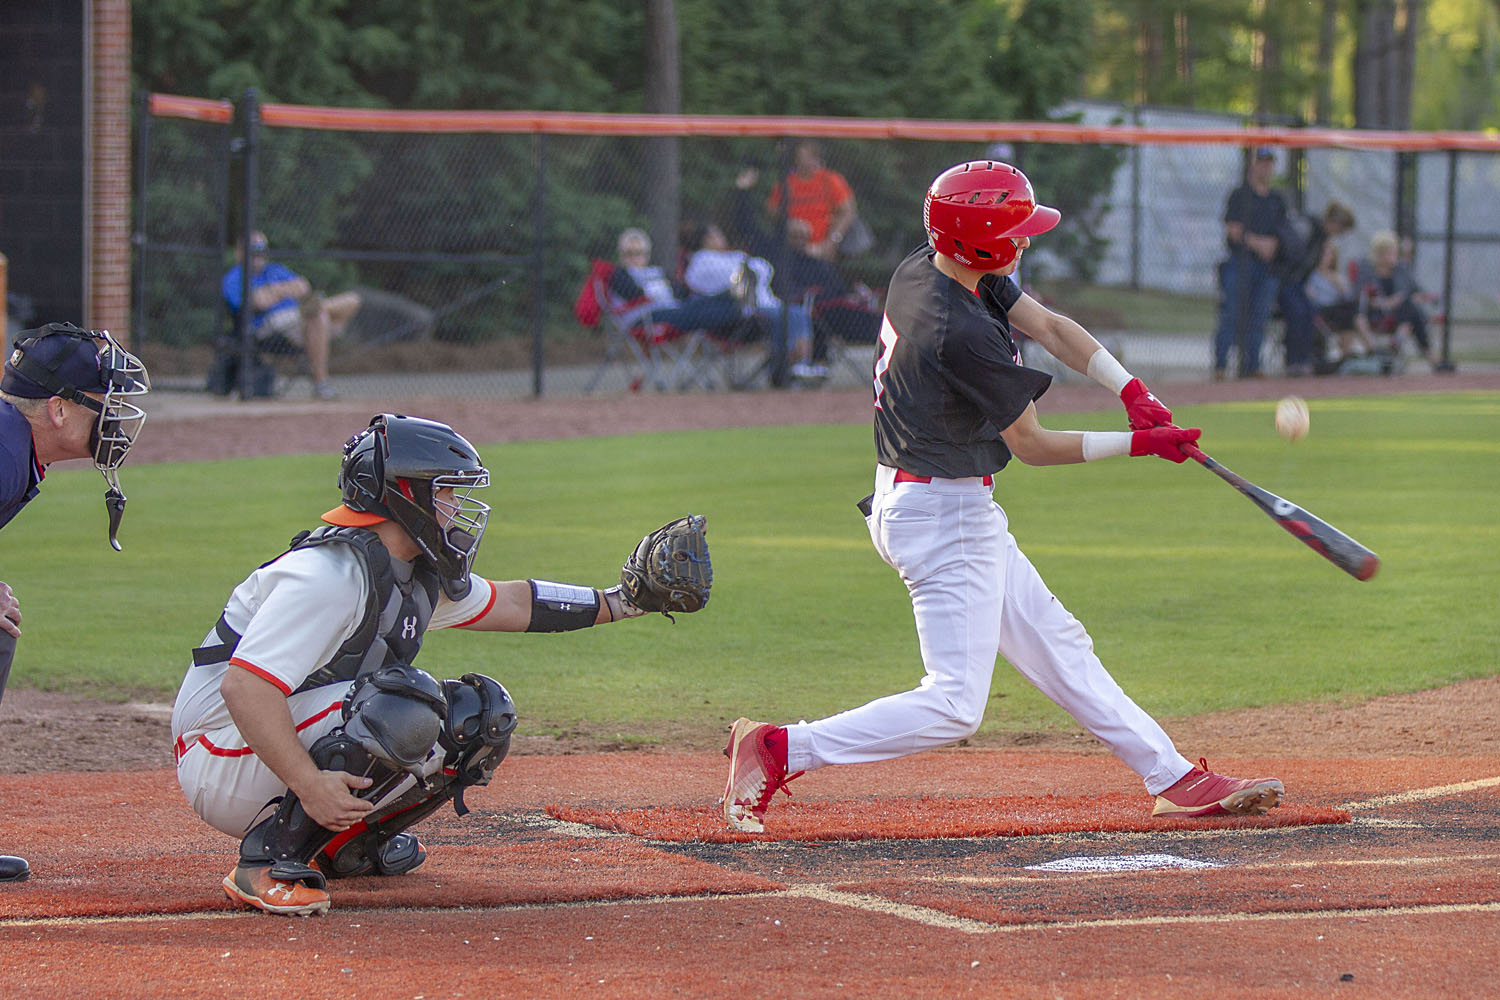 Huskies deliver 7th inning knockout to advance past Hoover